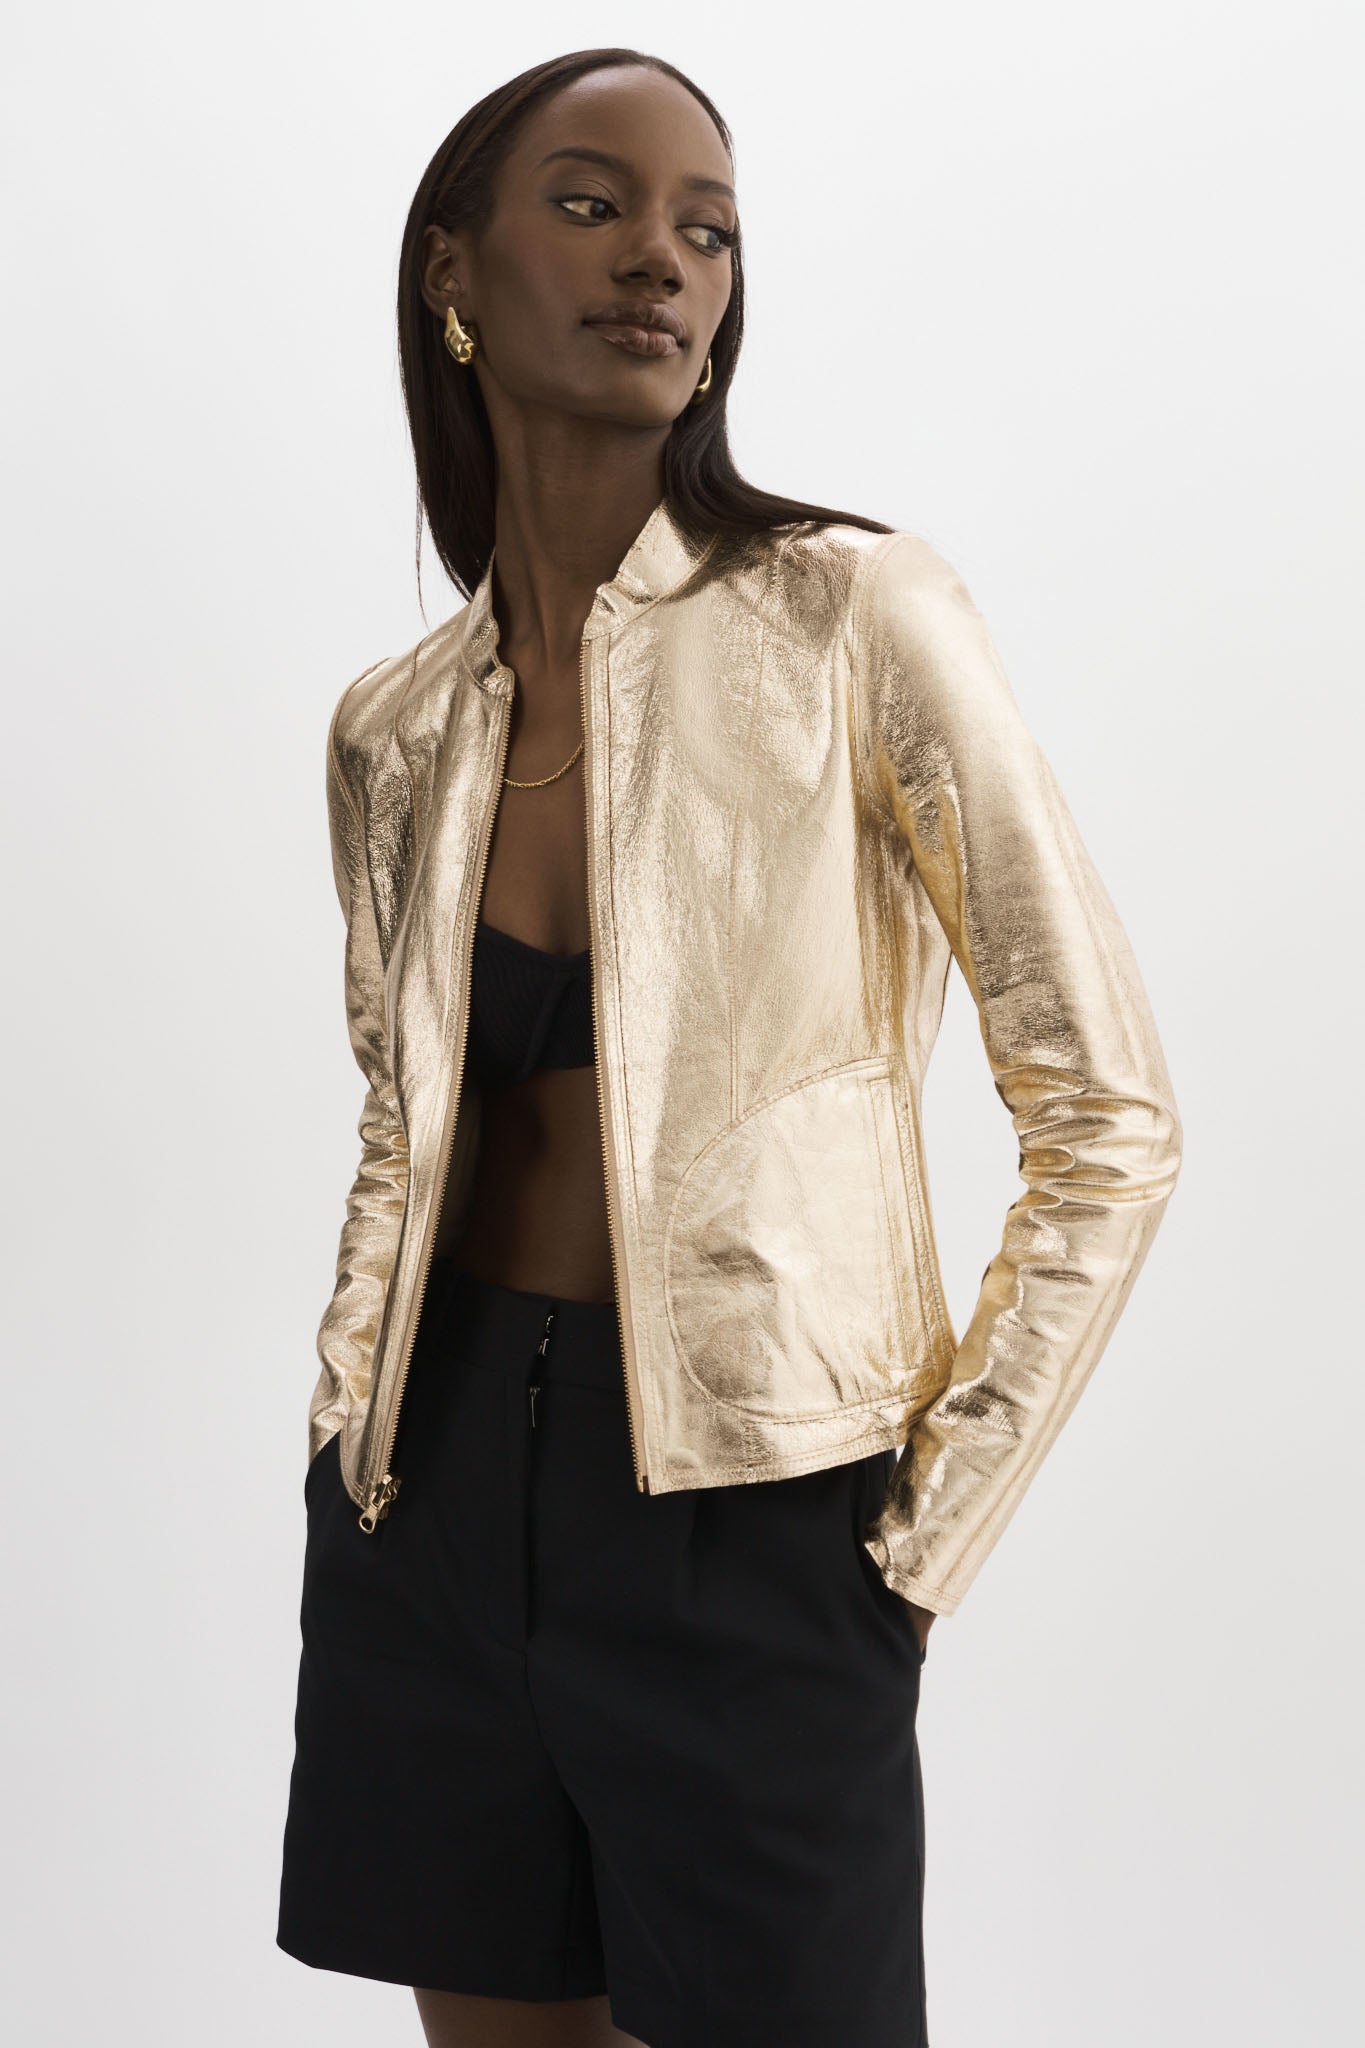 Lamarque Chapin Black & Gold Reversible Leather Bomber S